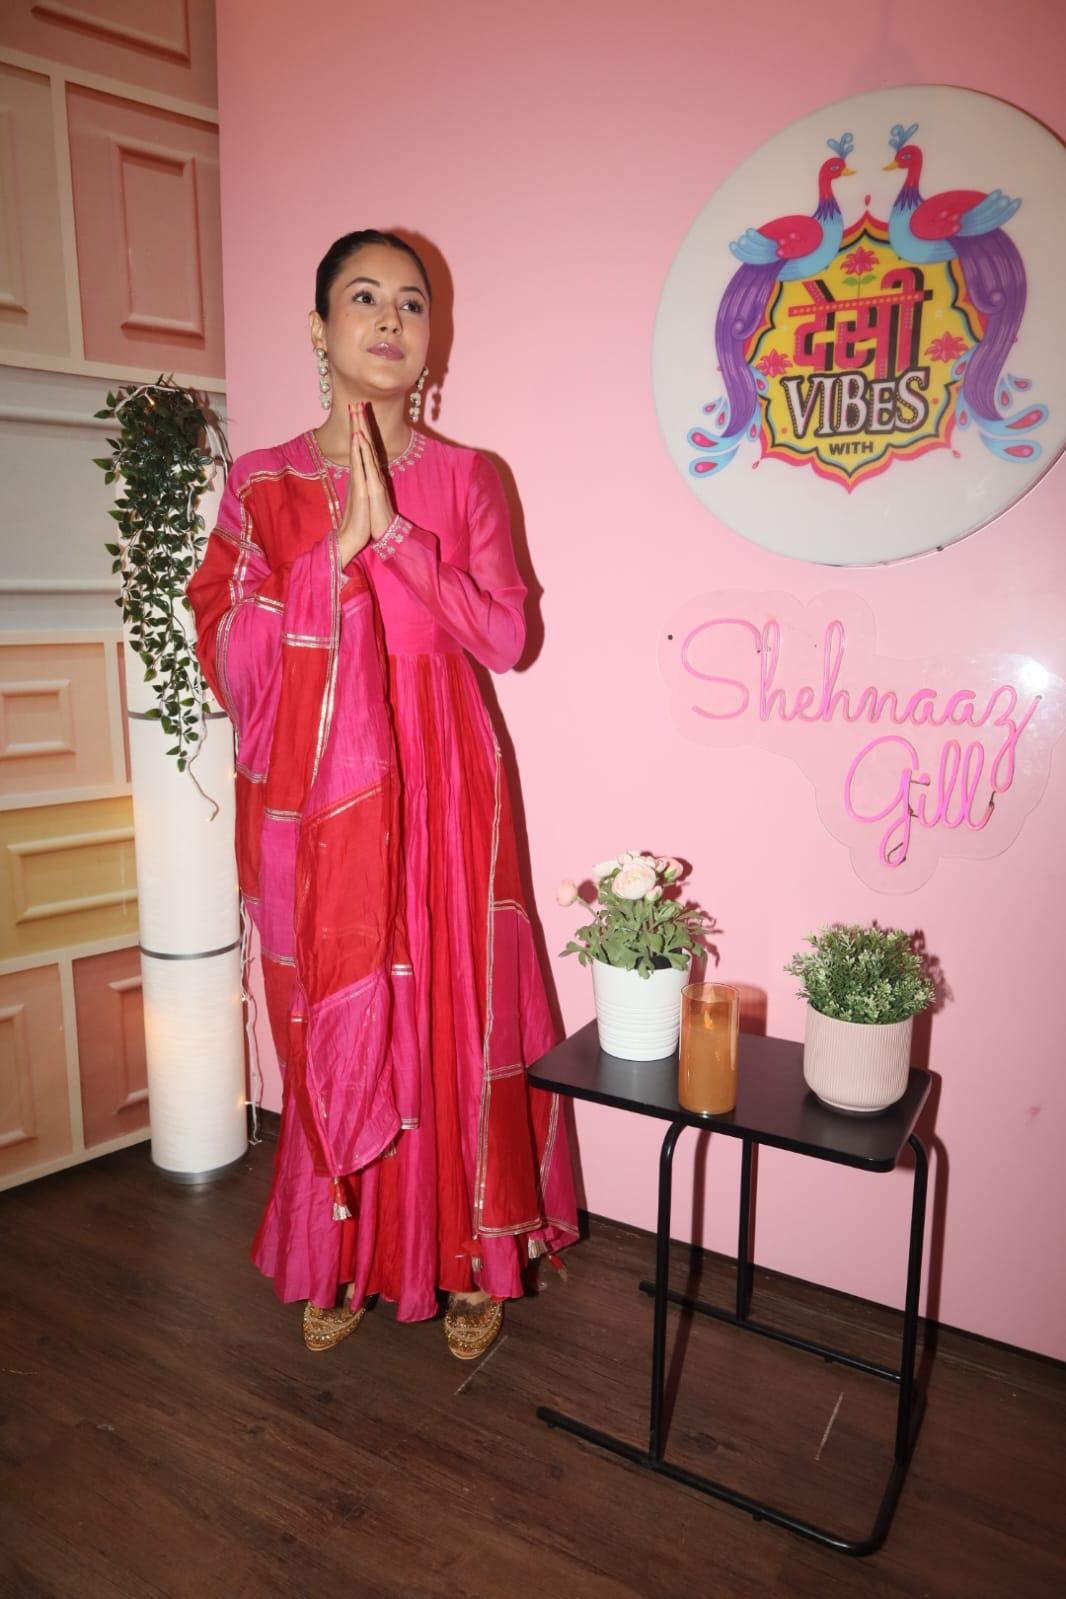 Shehnaaz Gill was clicked on the sets of Deshi Vibes at a studio in Andheri